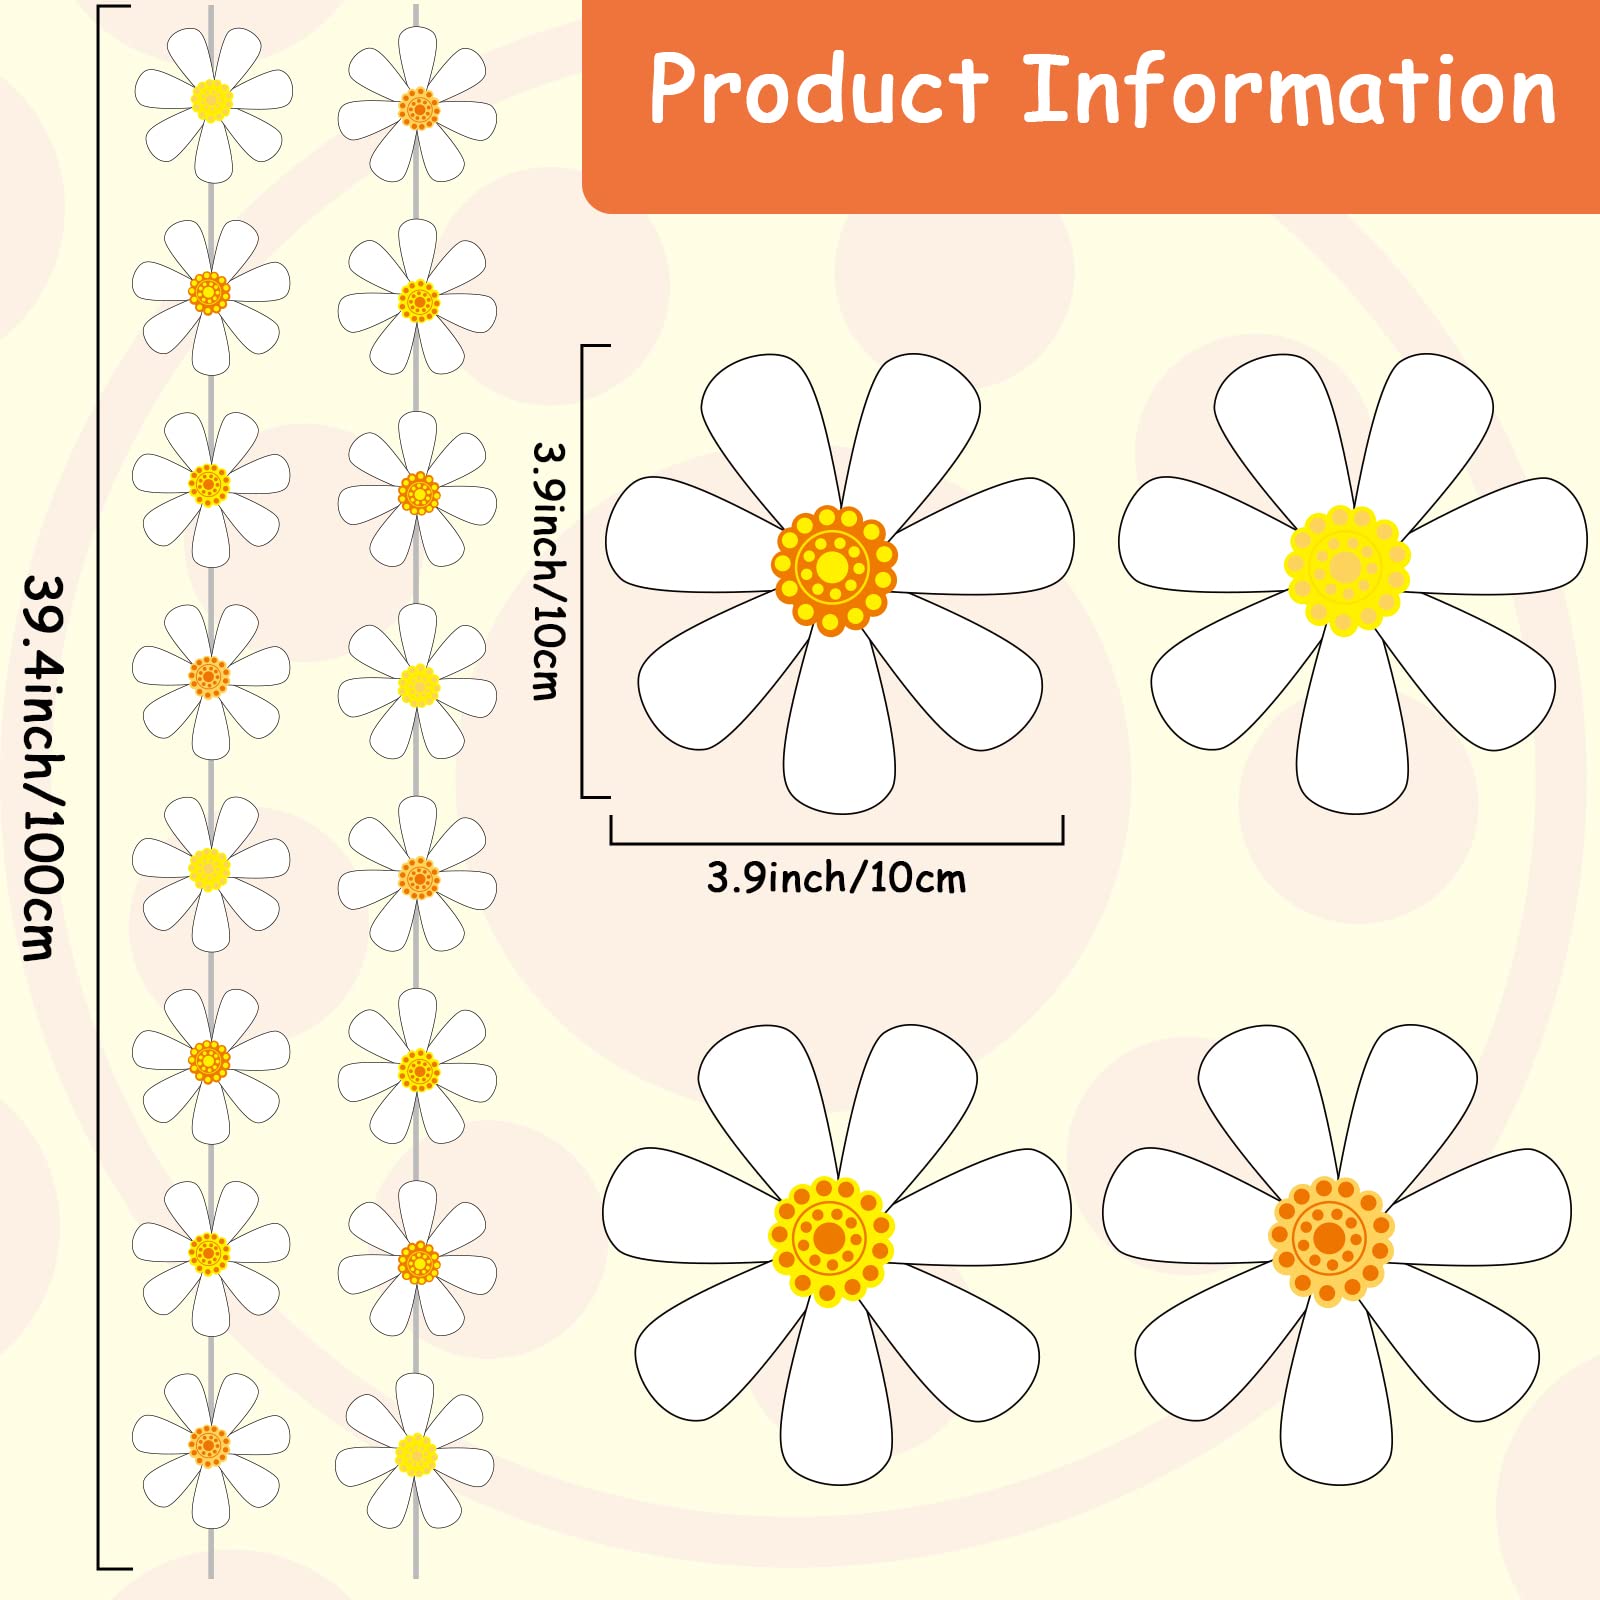 12 Packs Daisy Groovy Boho Party Banners Daisy Garland Kit Daisy Hanging Swirl Hippie Party Decorations White Daisy Paper Cutouts for One Birthday Baby Shower Party Home Classroom Favor Supplies Decor